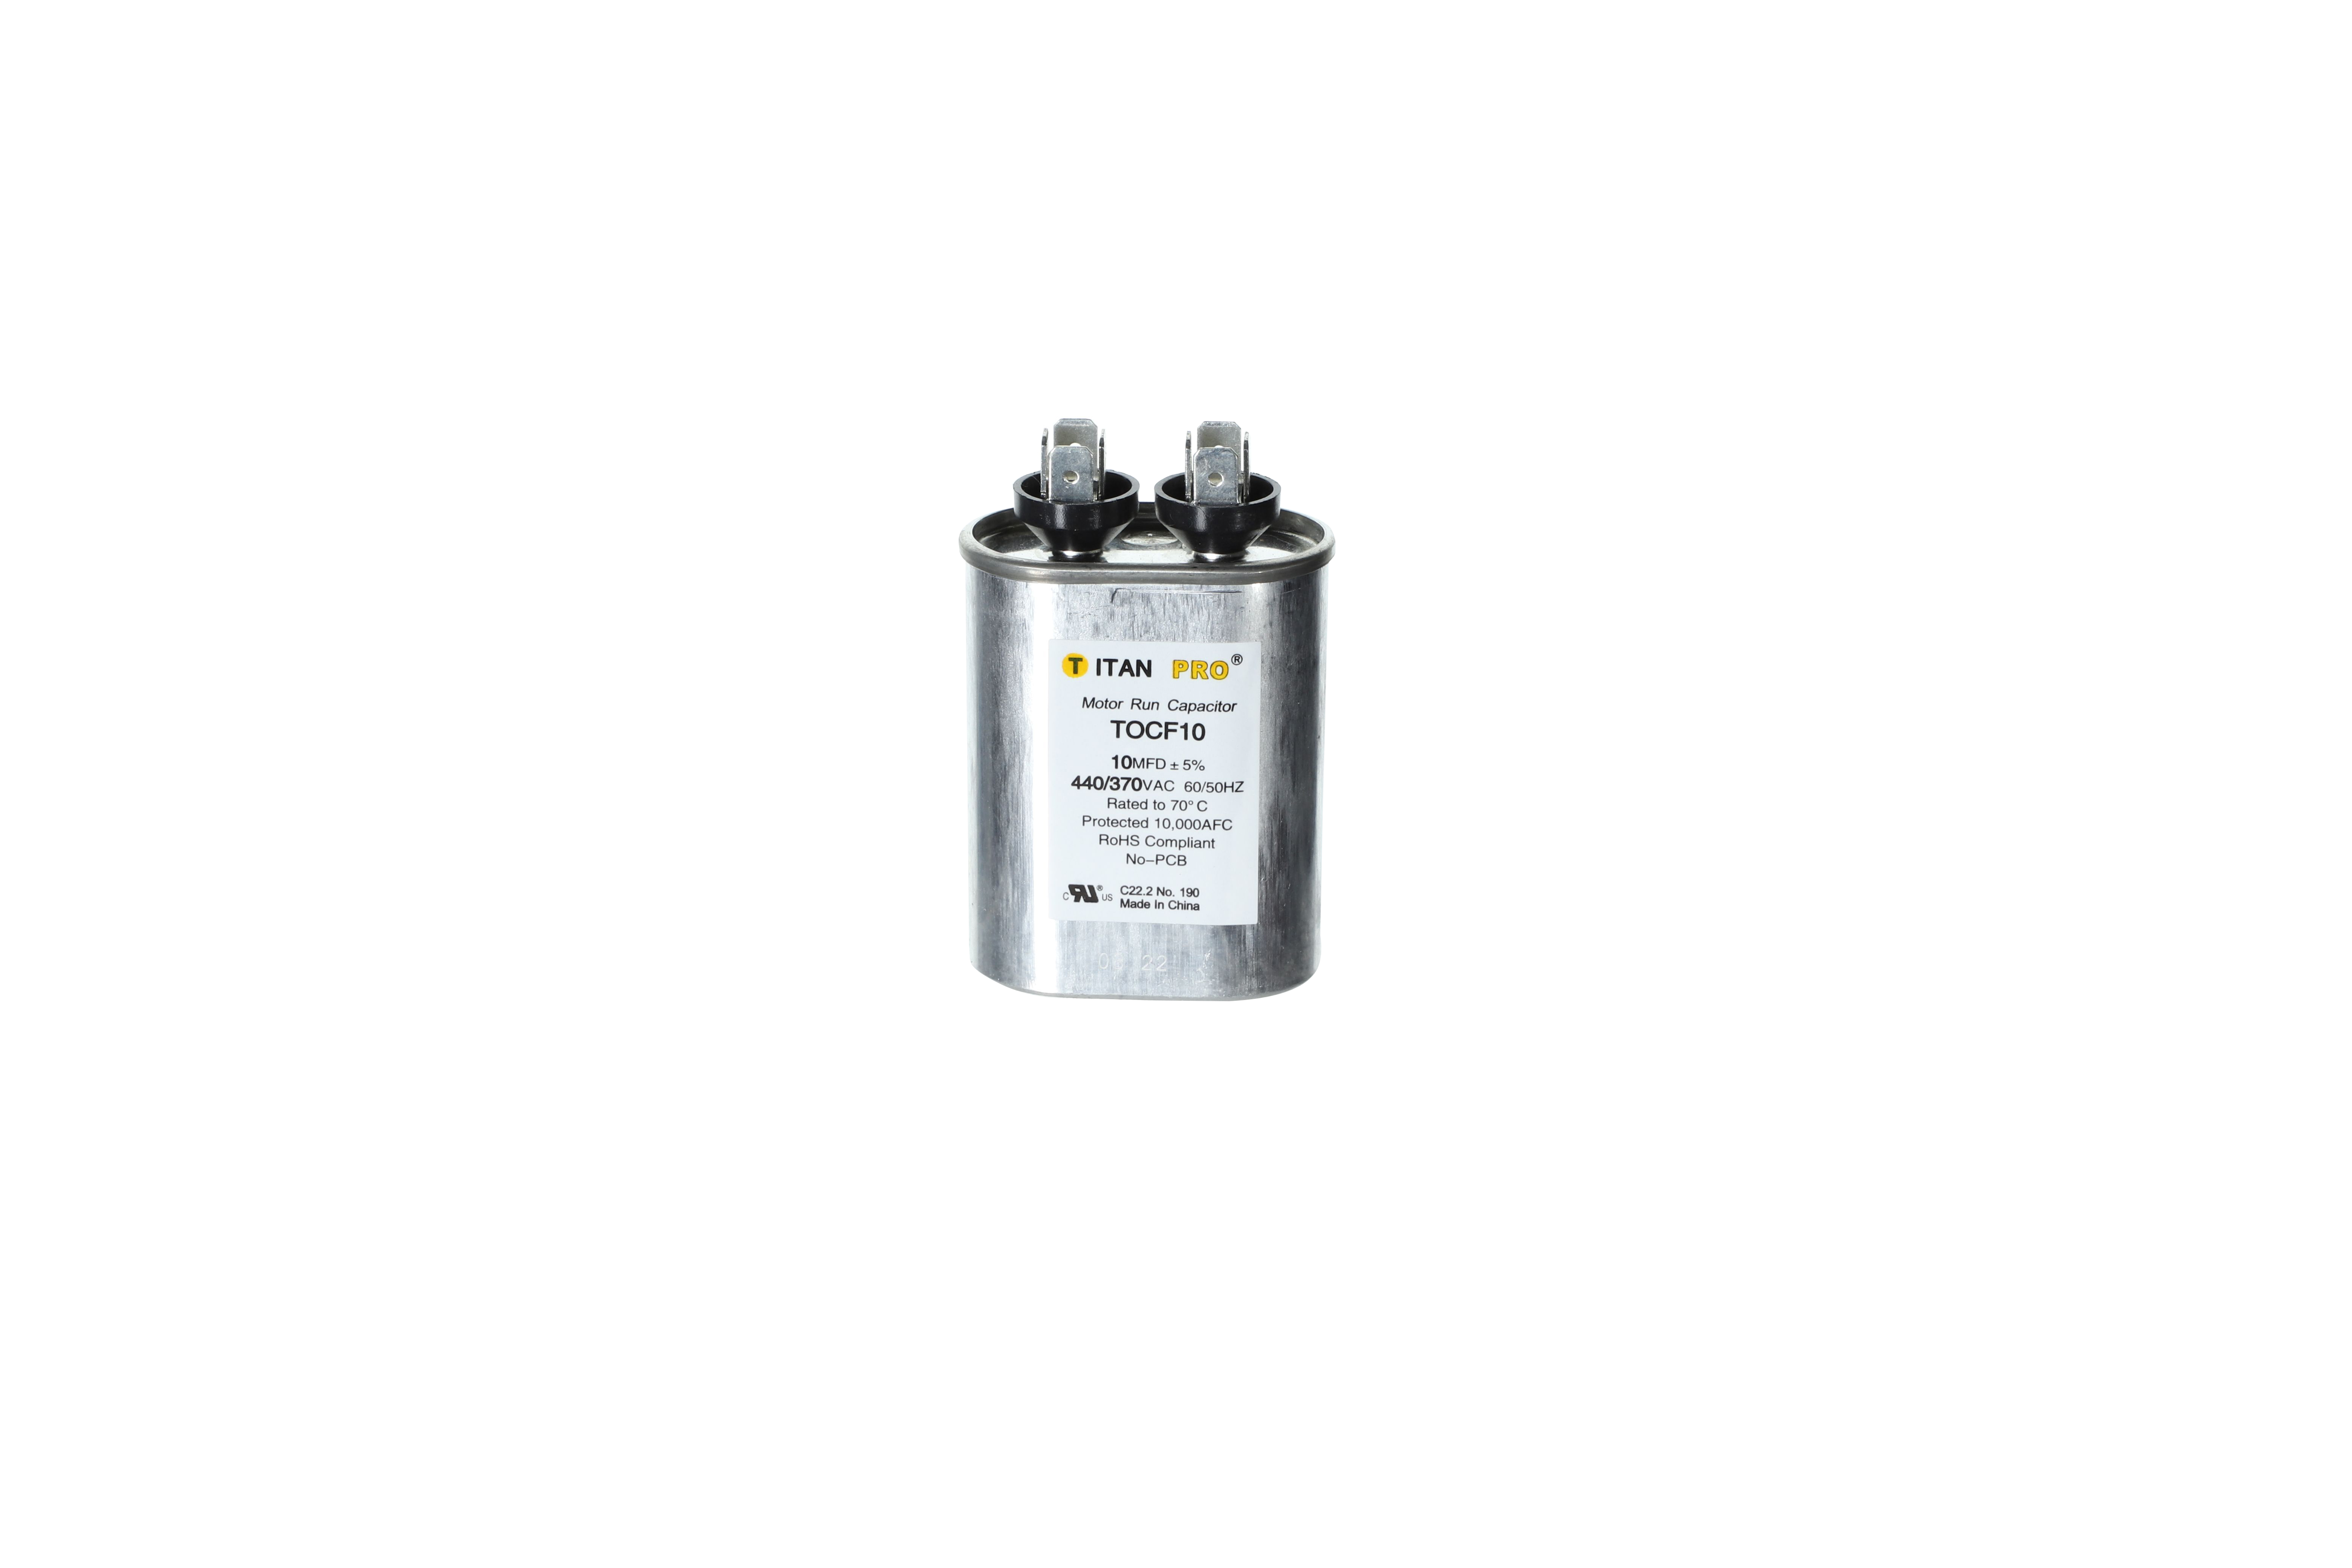 Packard Titan Pro™ TOCF20 Single Section Motor Run Capacitor, 20 uF, 440/370 VAC, Oval